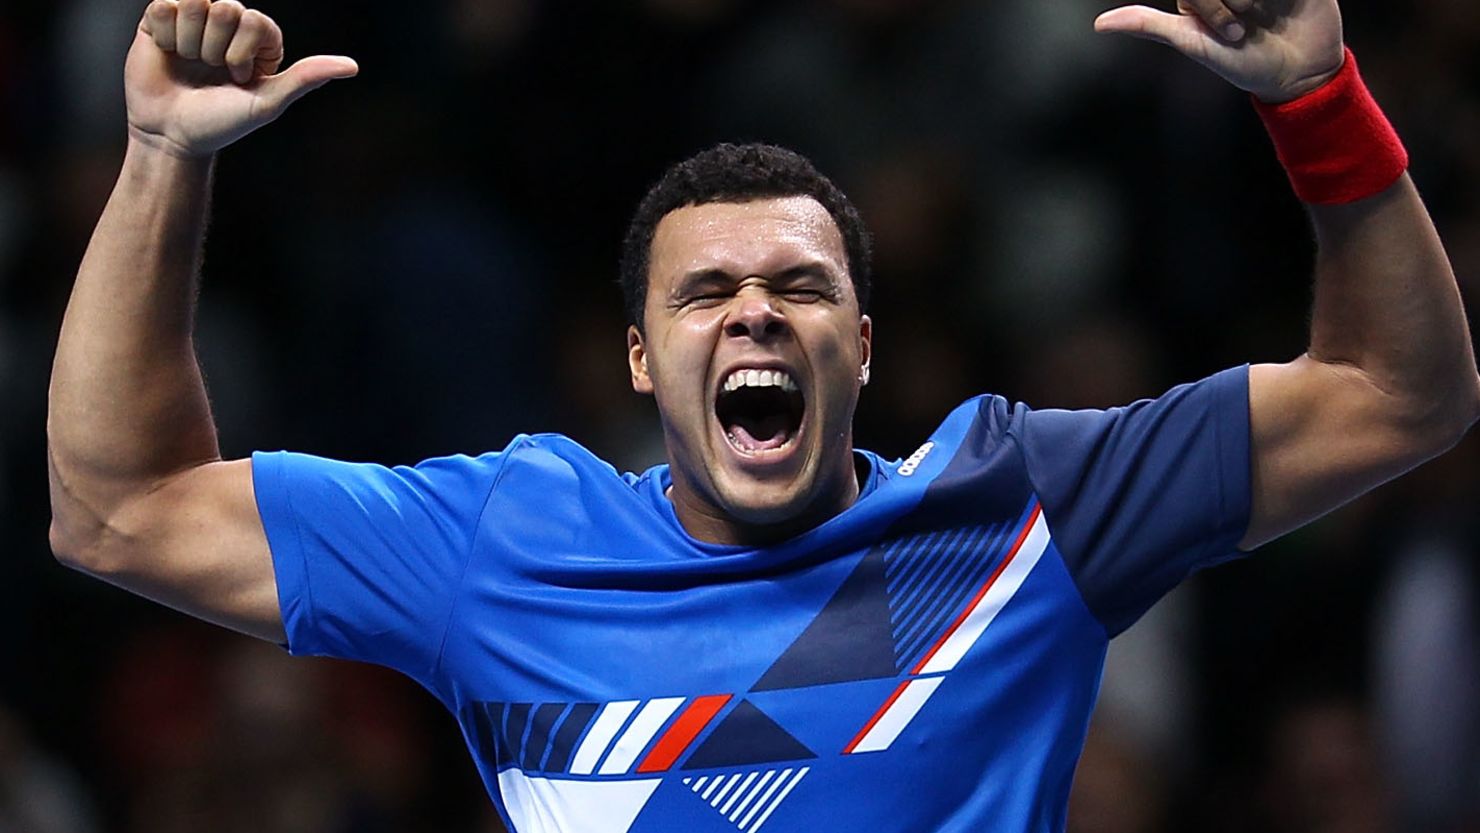 Jo-Wilfried Tsonga celebrates with his trademark victory dance after beating Rafael Nadal on Thursday.